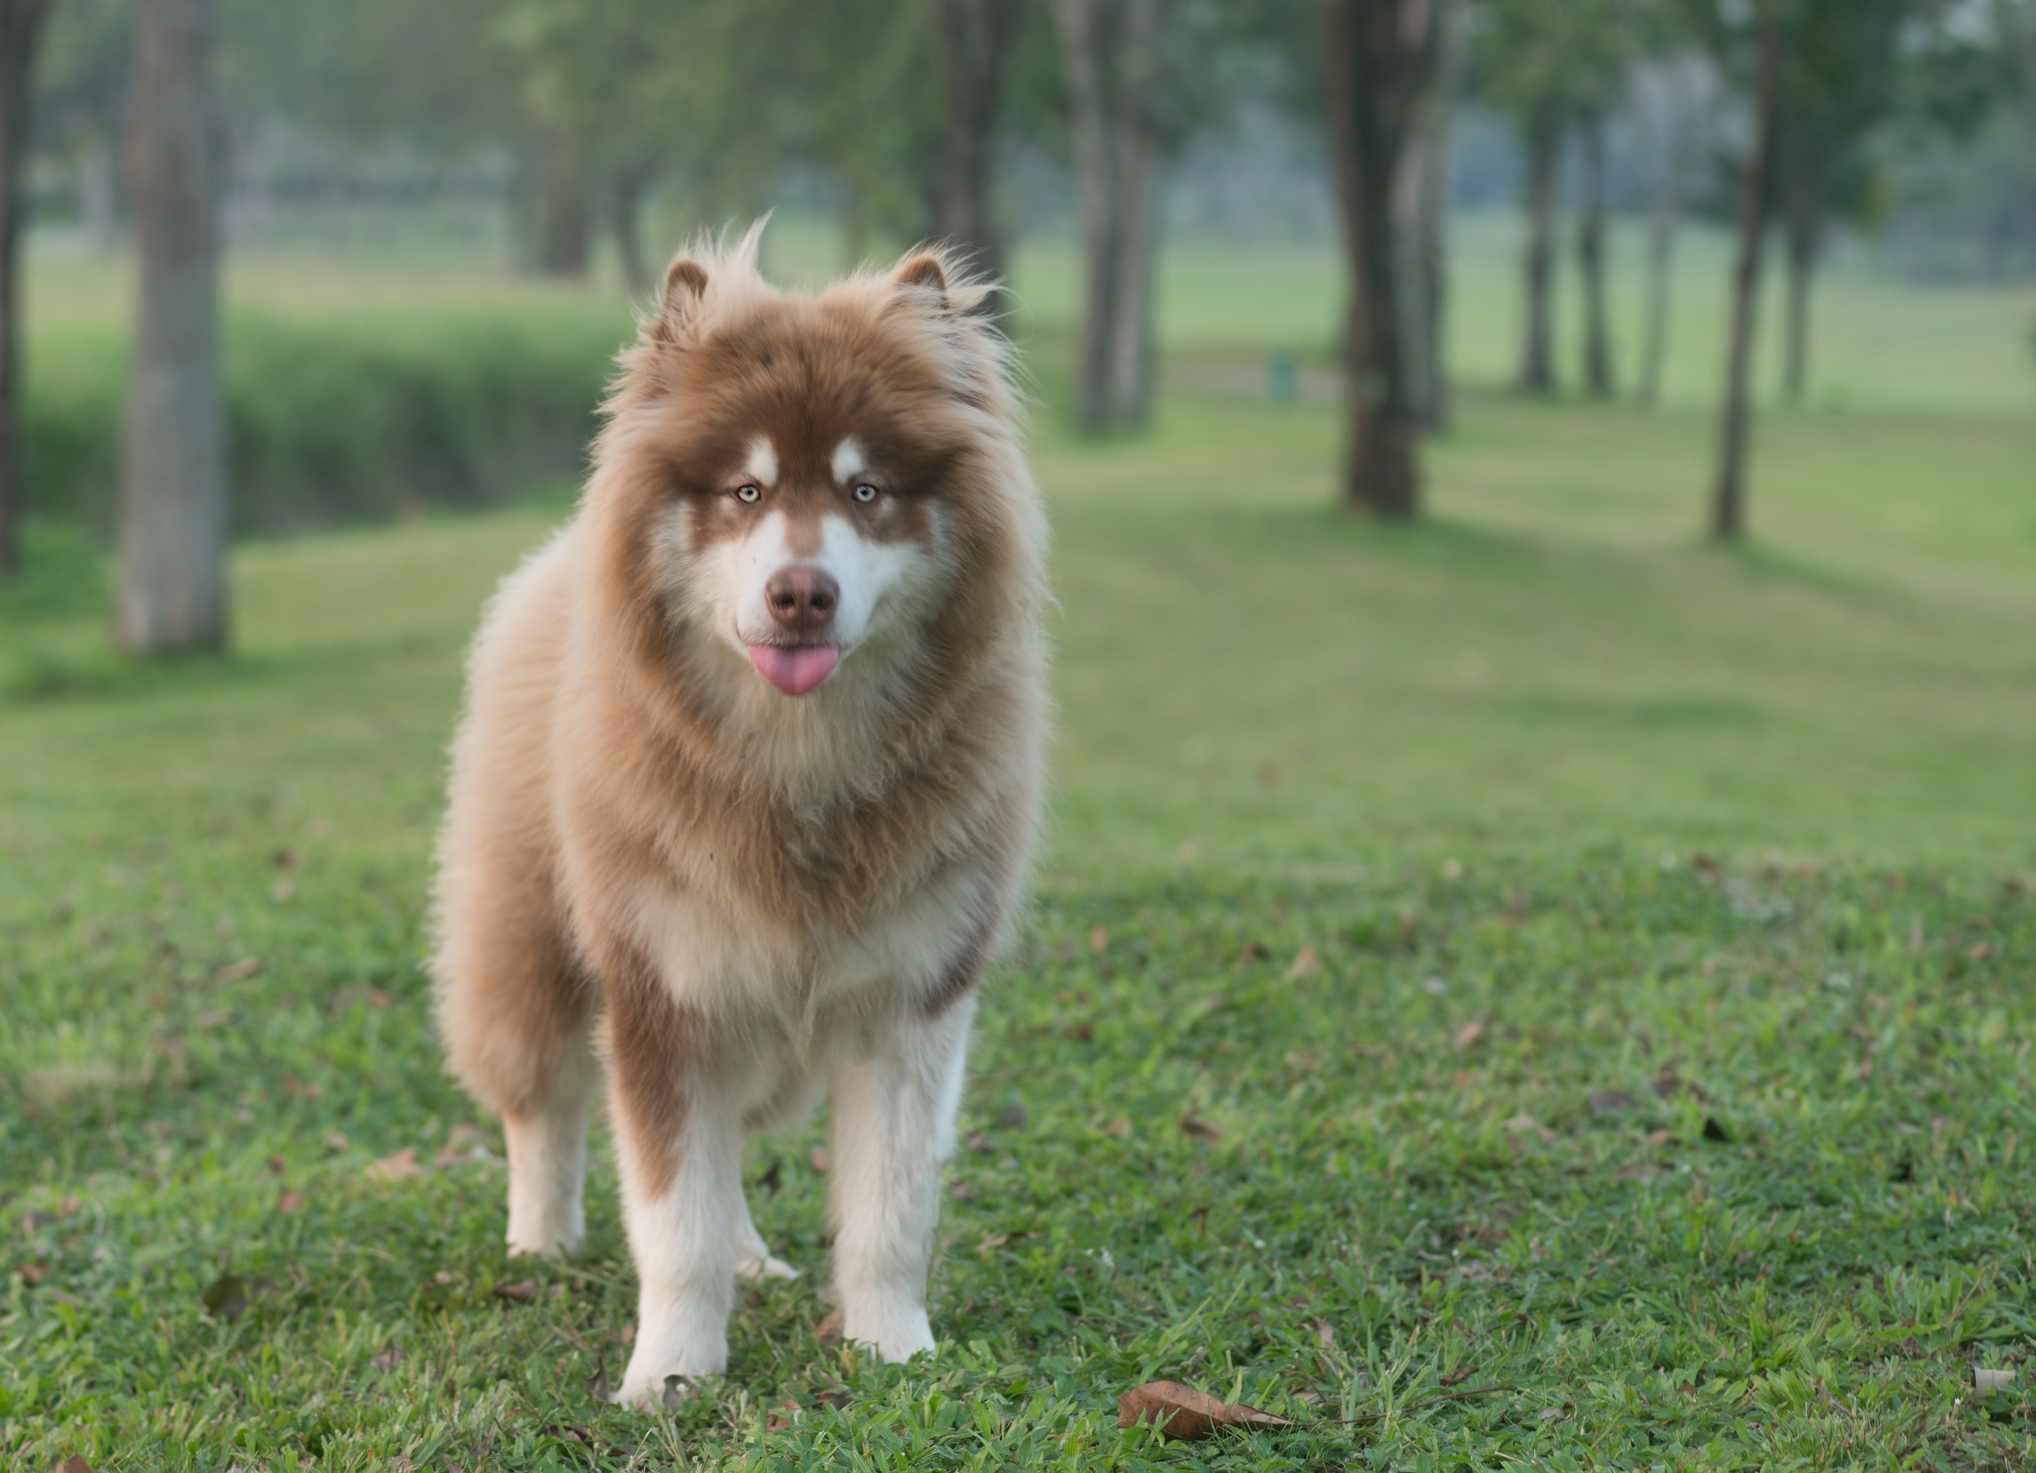 Brown Alaskan Malamute with tongue out standing in a grassy field.